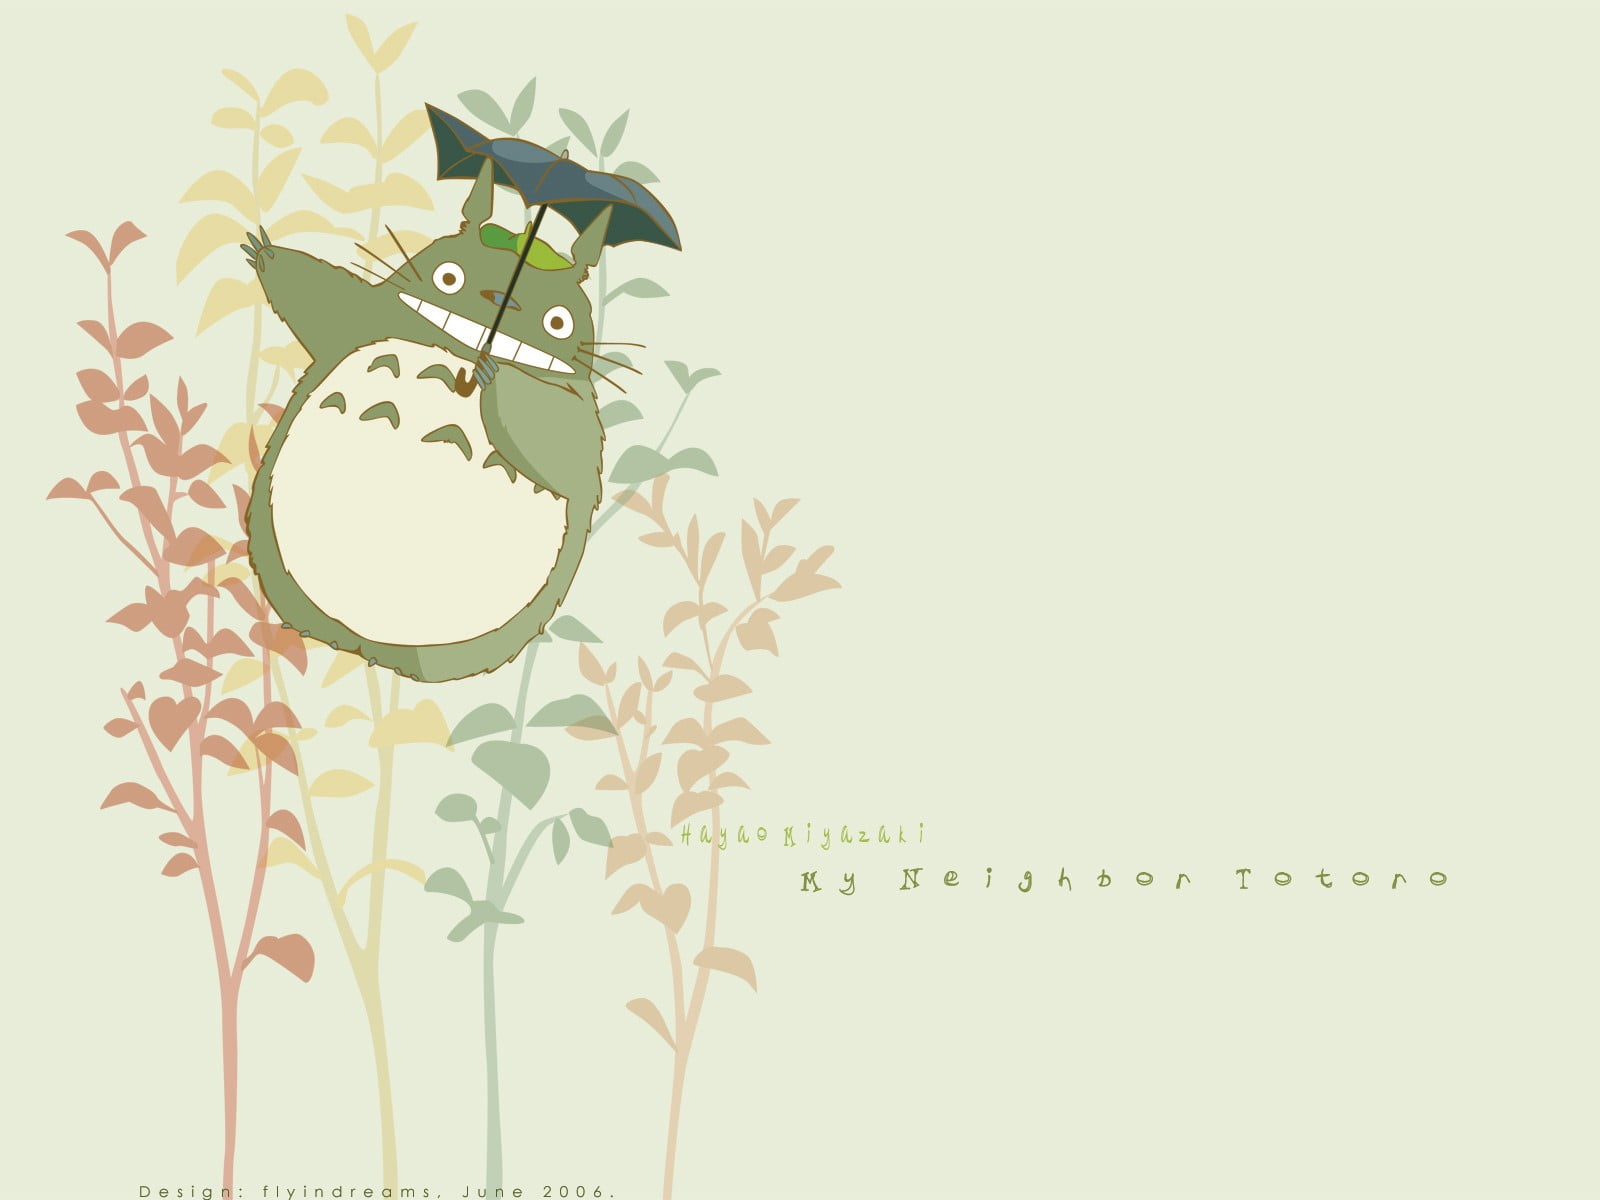 Green And White Animal Illustration My Neighbor Totoro Totoro Images, Photos, Reviews